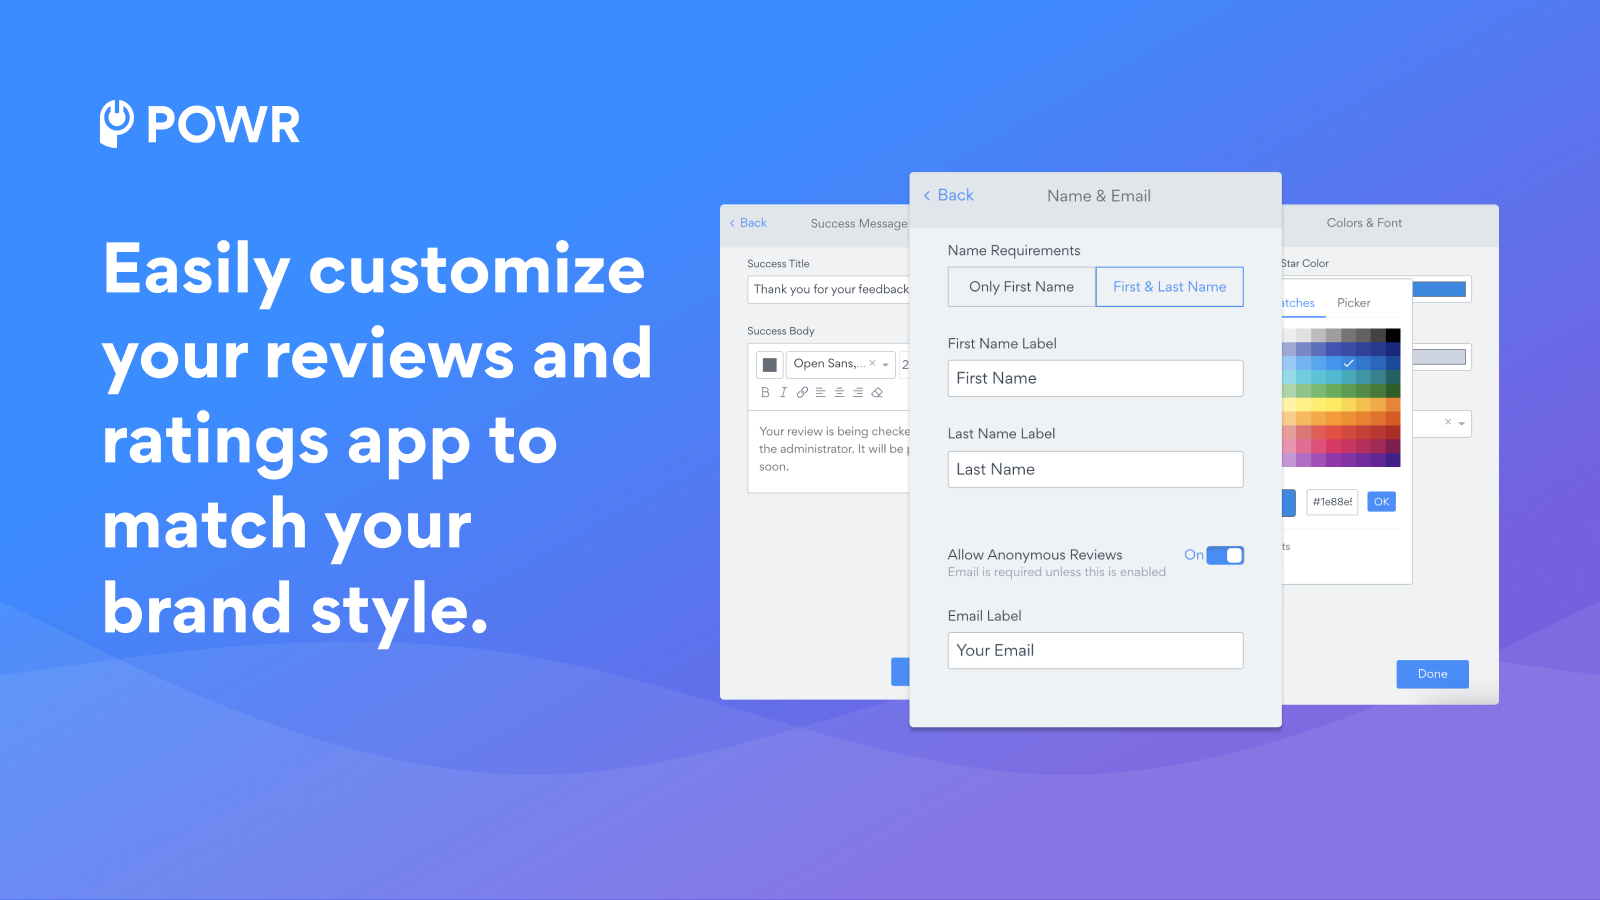 Customize your reviews & ratings app to match your brand style.